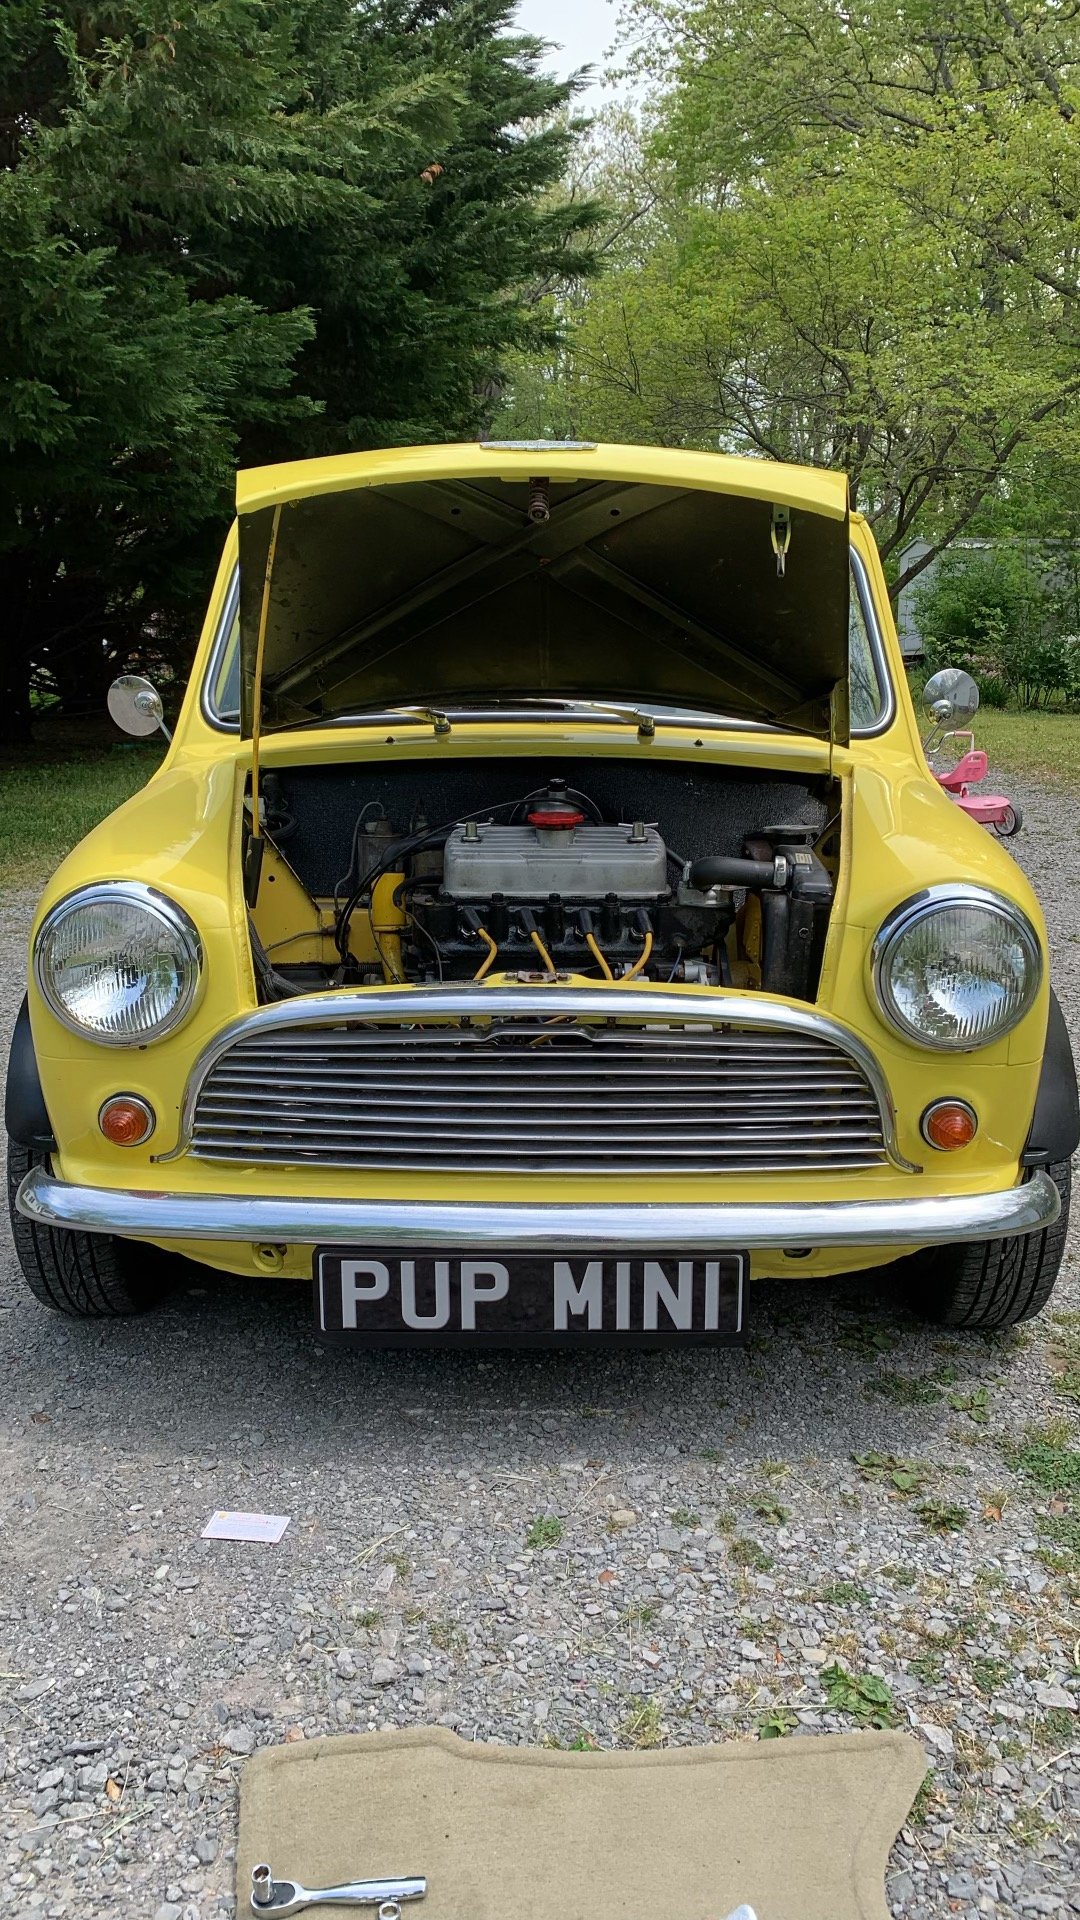 1971 Austin Pick up truck with 1275 motor (Sold) — Super Coopers